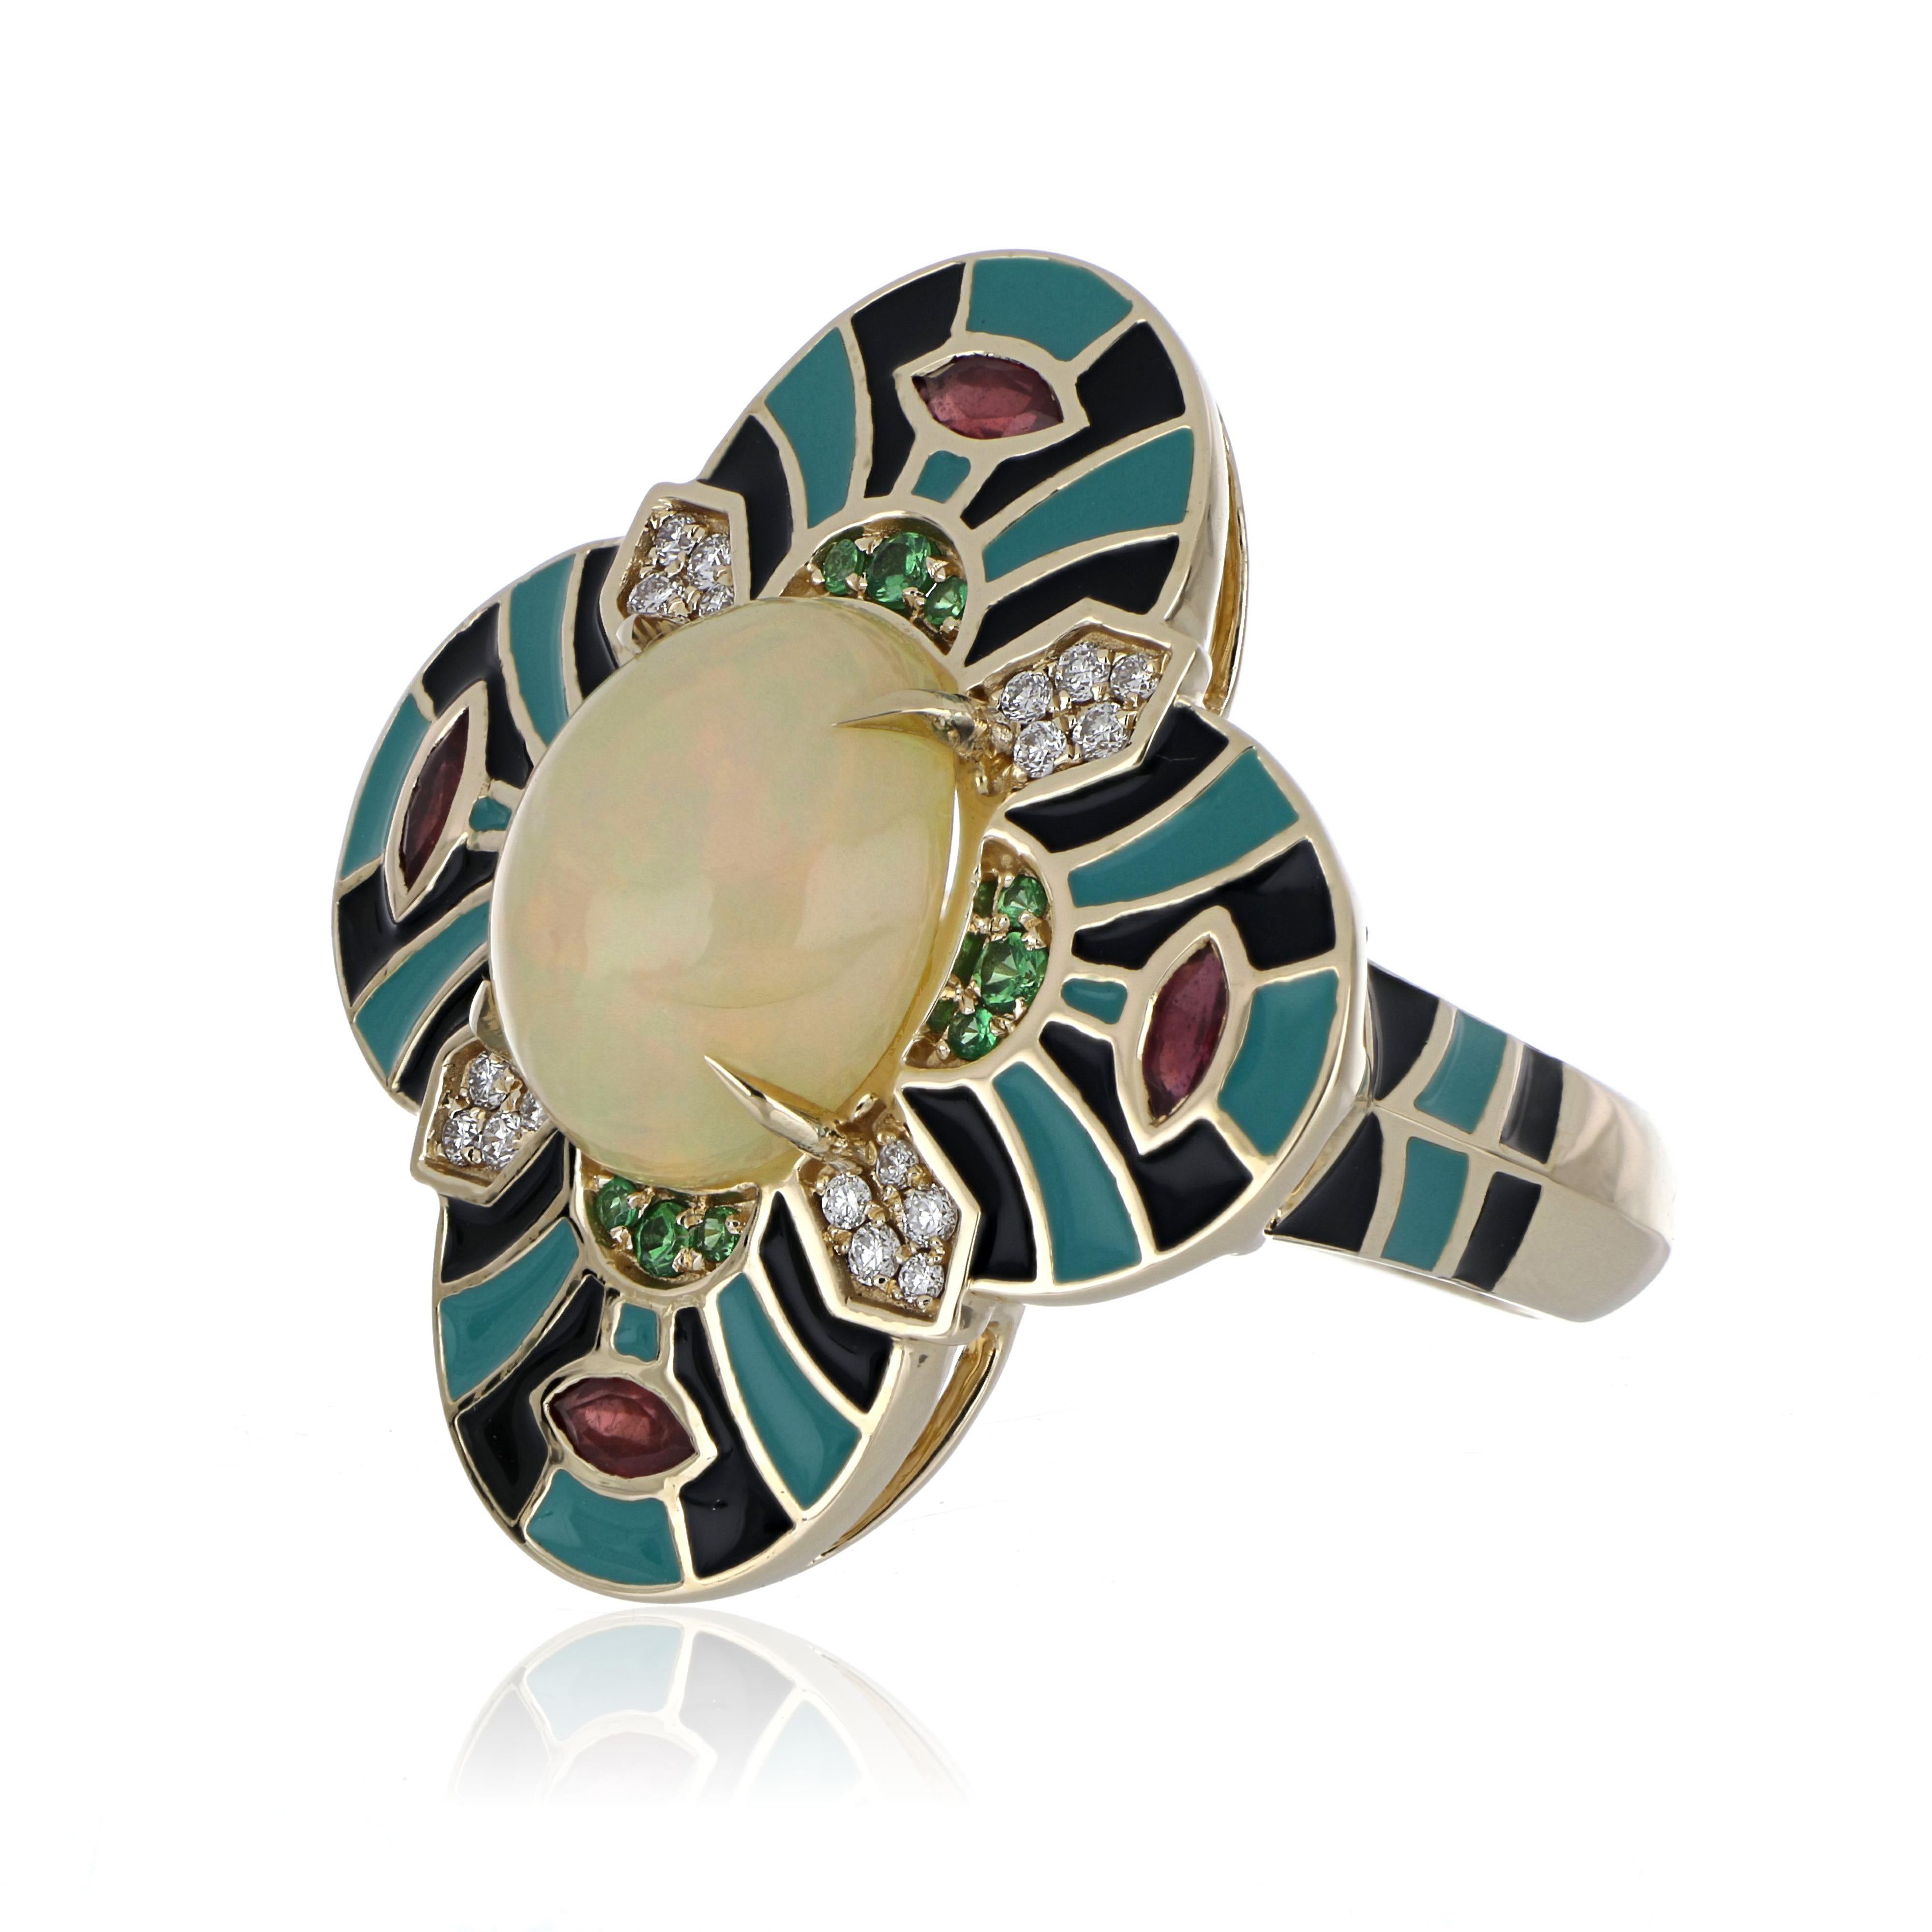 Elegant and exquisite Multi Colour Enamel Cocktail 14 K Ring, center set with 2.82 Cts. Cabochon Oval vibrant Ethiopial Opal, Surrounded with Tsavorite 0.11 Cts and Ruby Marquise 0.54 Cts. accented with Diamonds, weighing approx. 0.13 Cts.